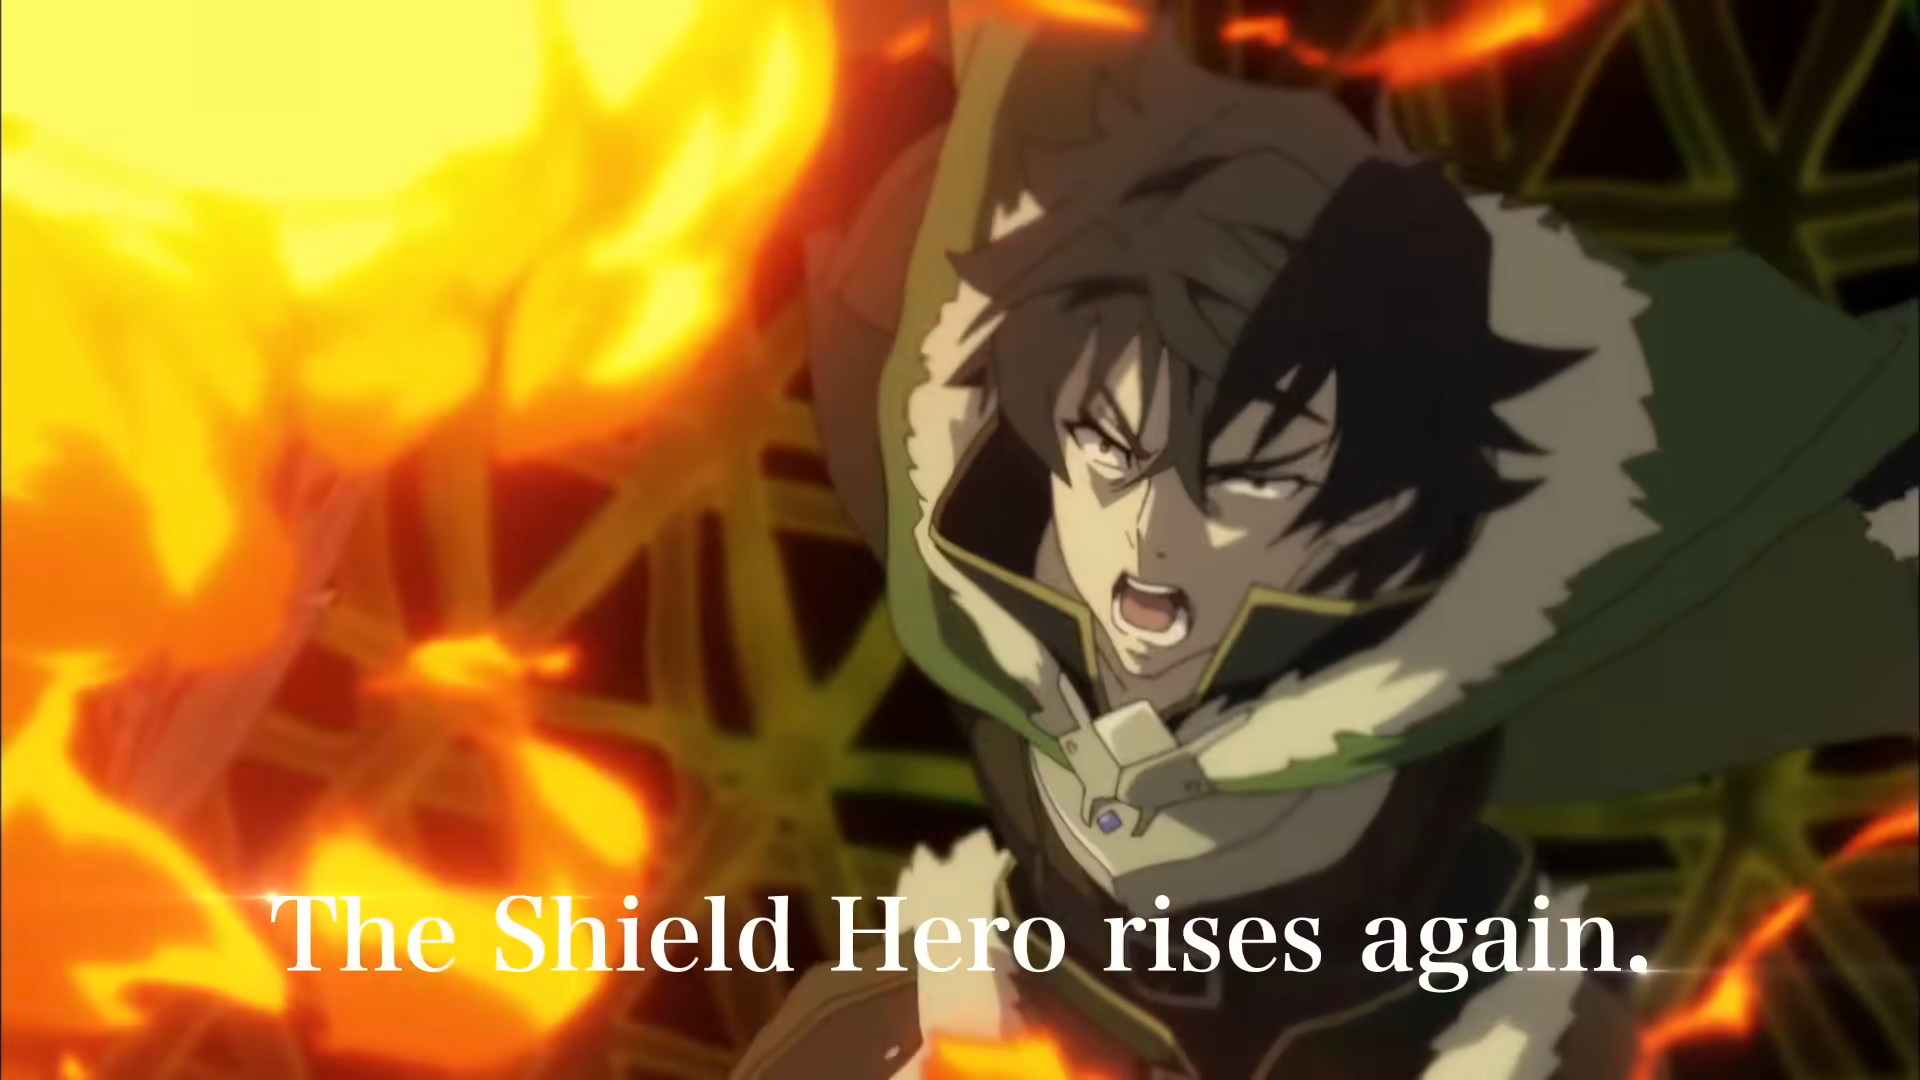 The Rising of the Shield Hero Season 3 Teaser Visual Released